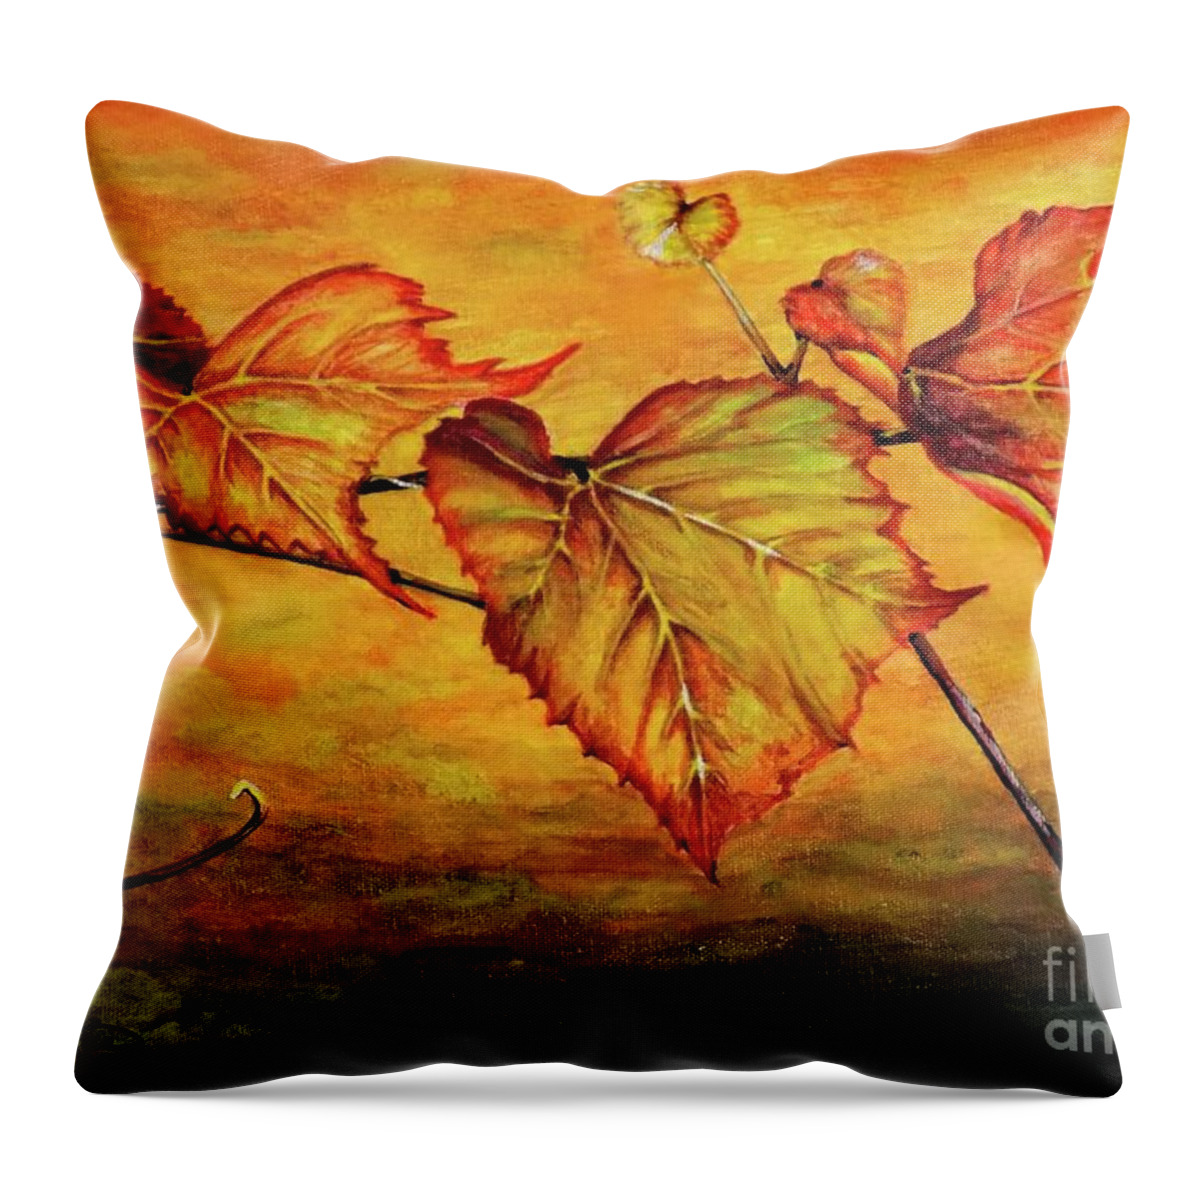 Grape Vine Throw Pillow featuring the painting Grape Vine by Judy Kirouac